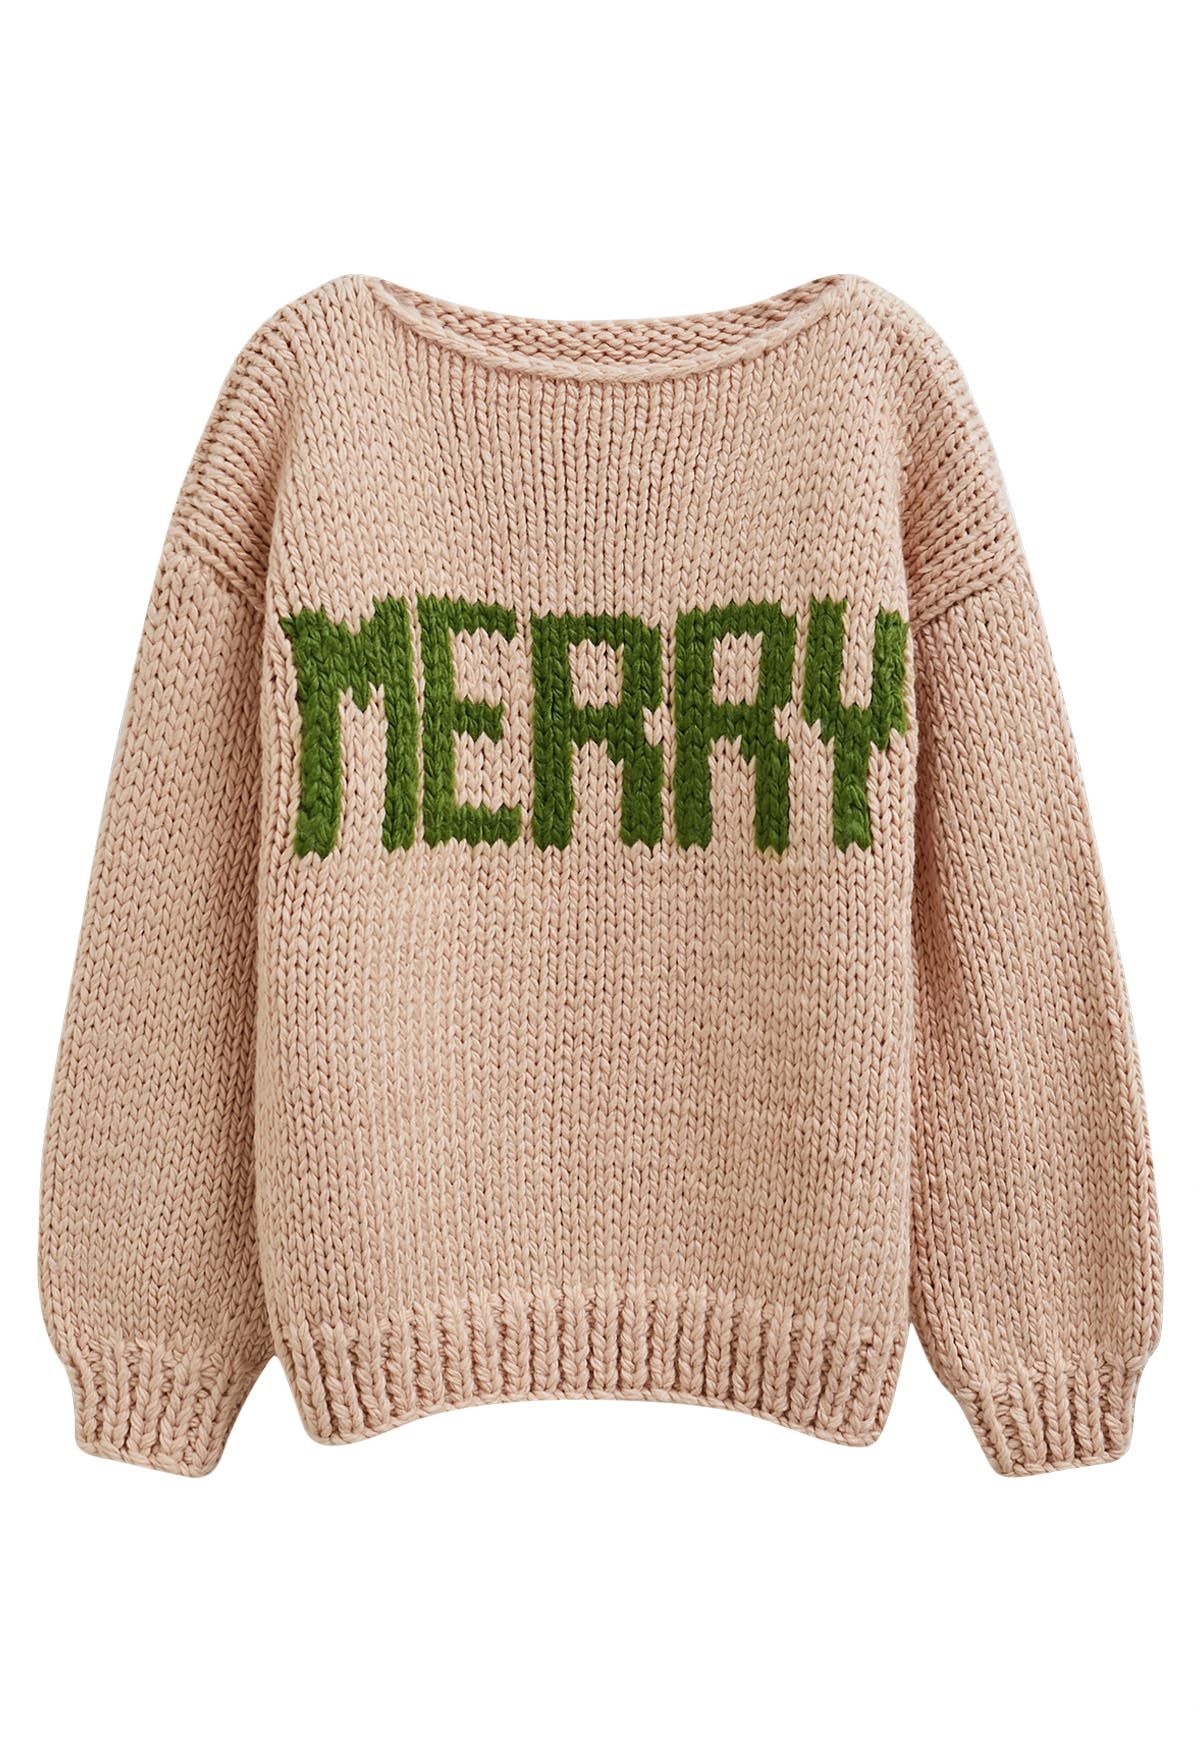 Merry Boat Neck Chunky Hand Knit Sweater